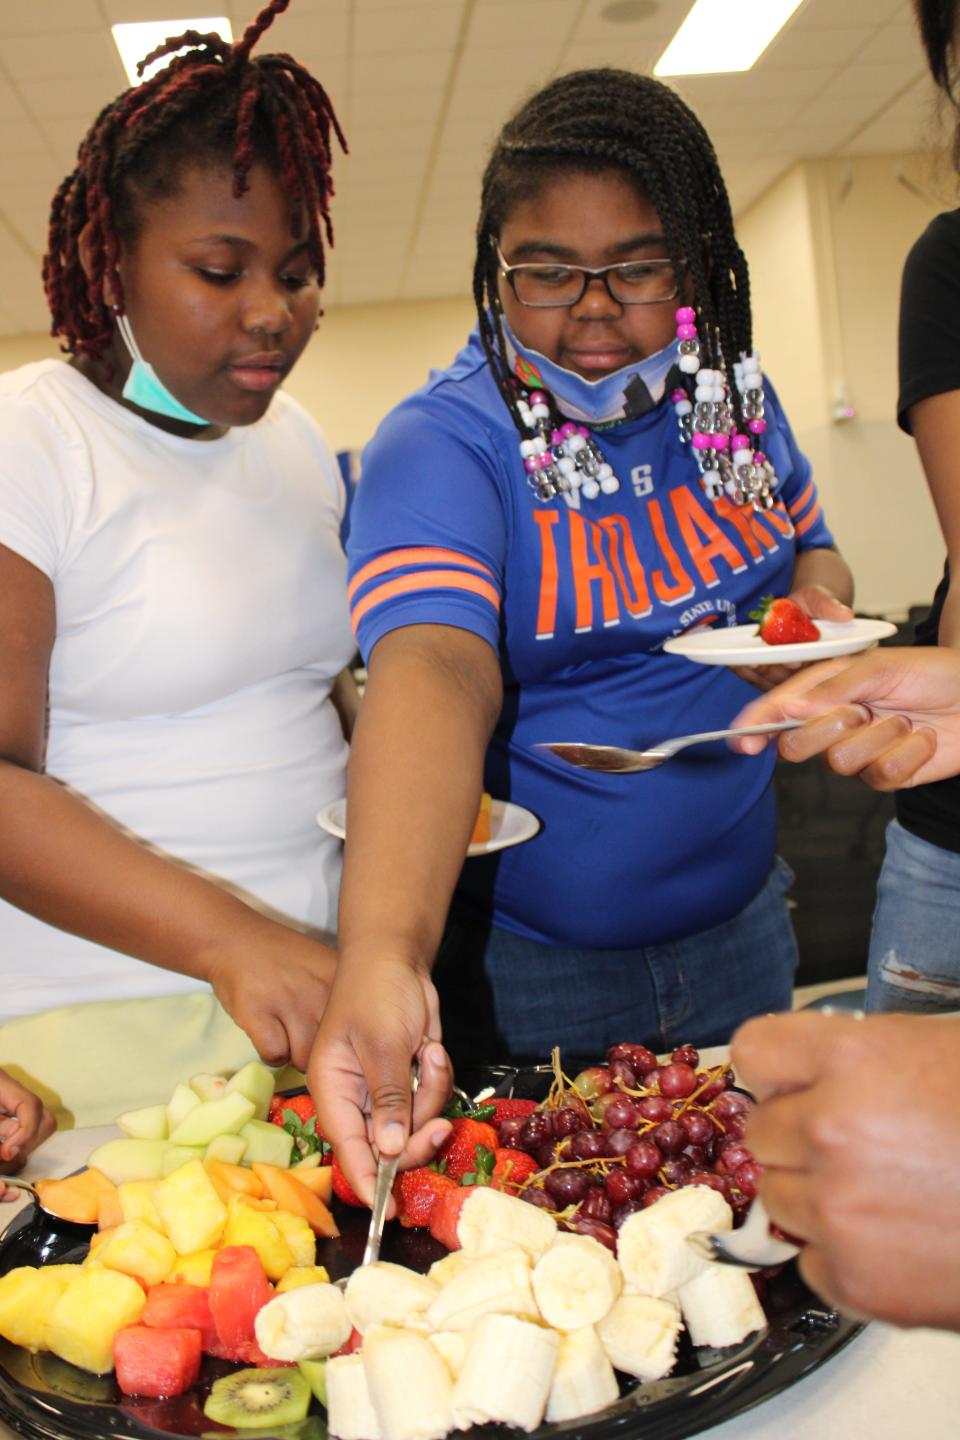 From left to right, Walnut Hill Elementary School students KeMarah S. and Jordan R. select fruit to eat after touring VSU Randolph Farm in Ettrick as part of Dominion Energy's Project Plant It! program on May 3, 2022.